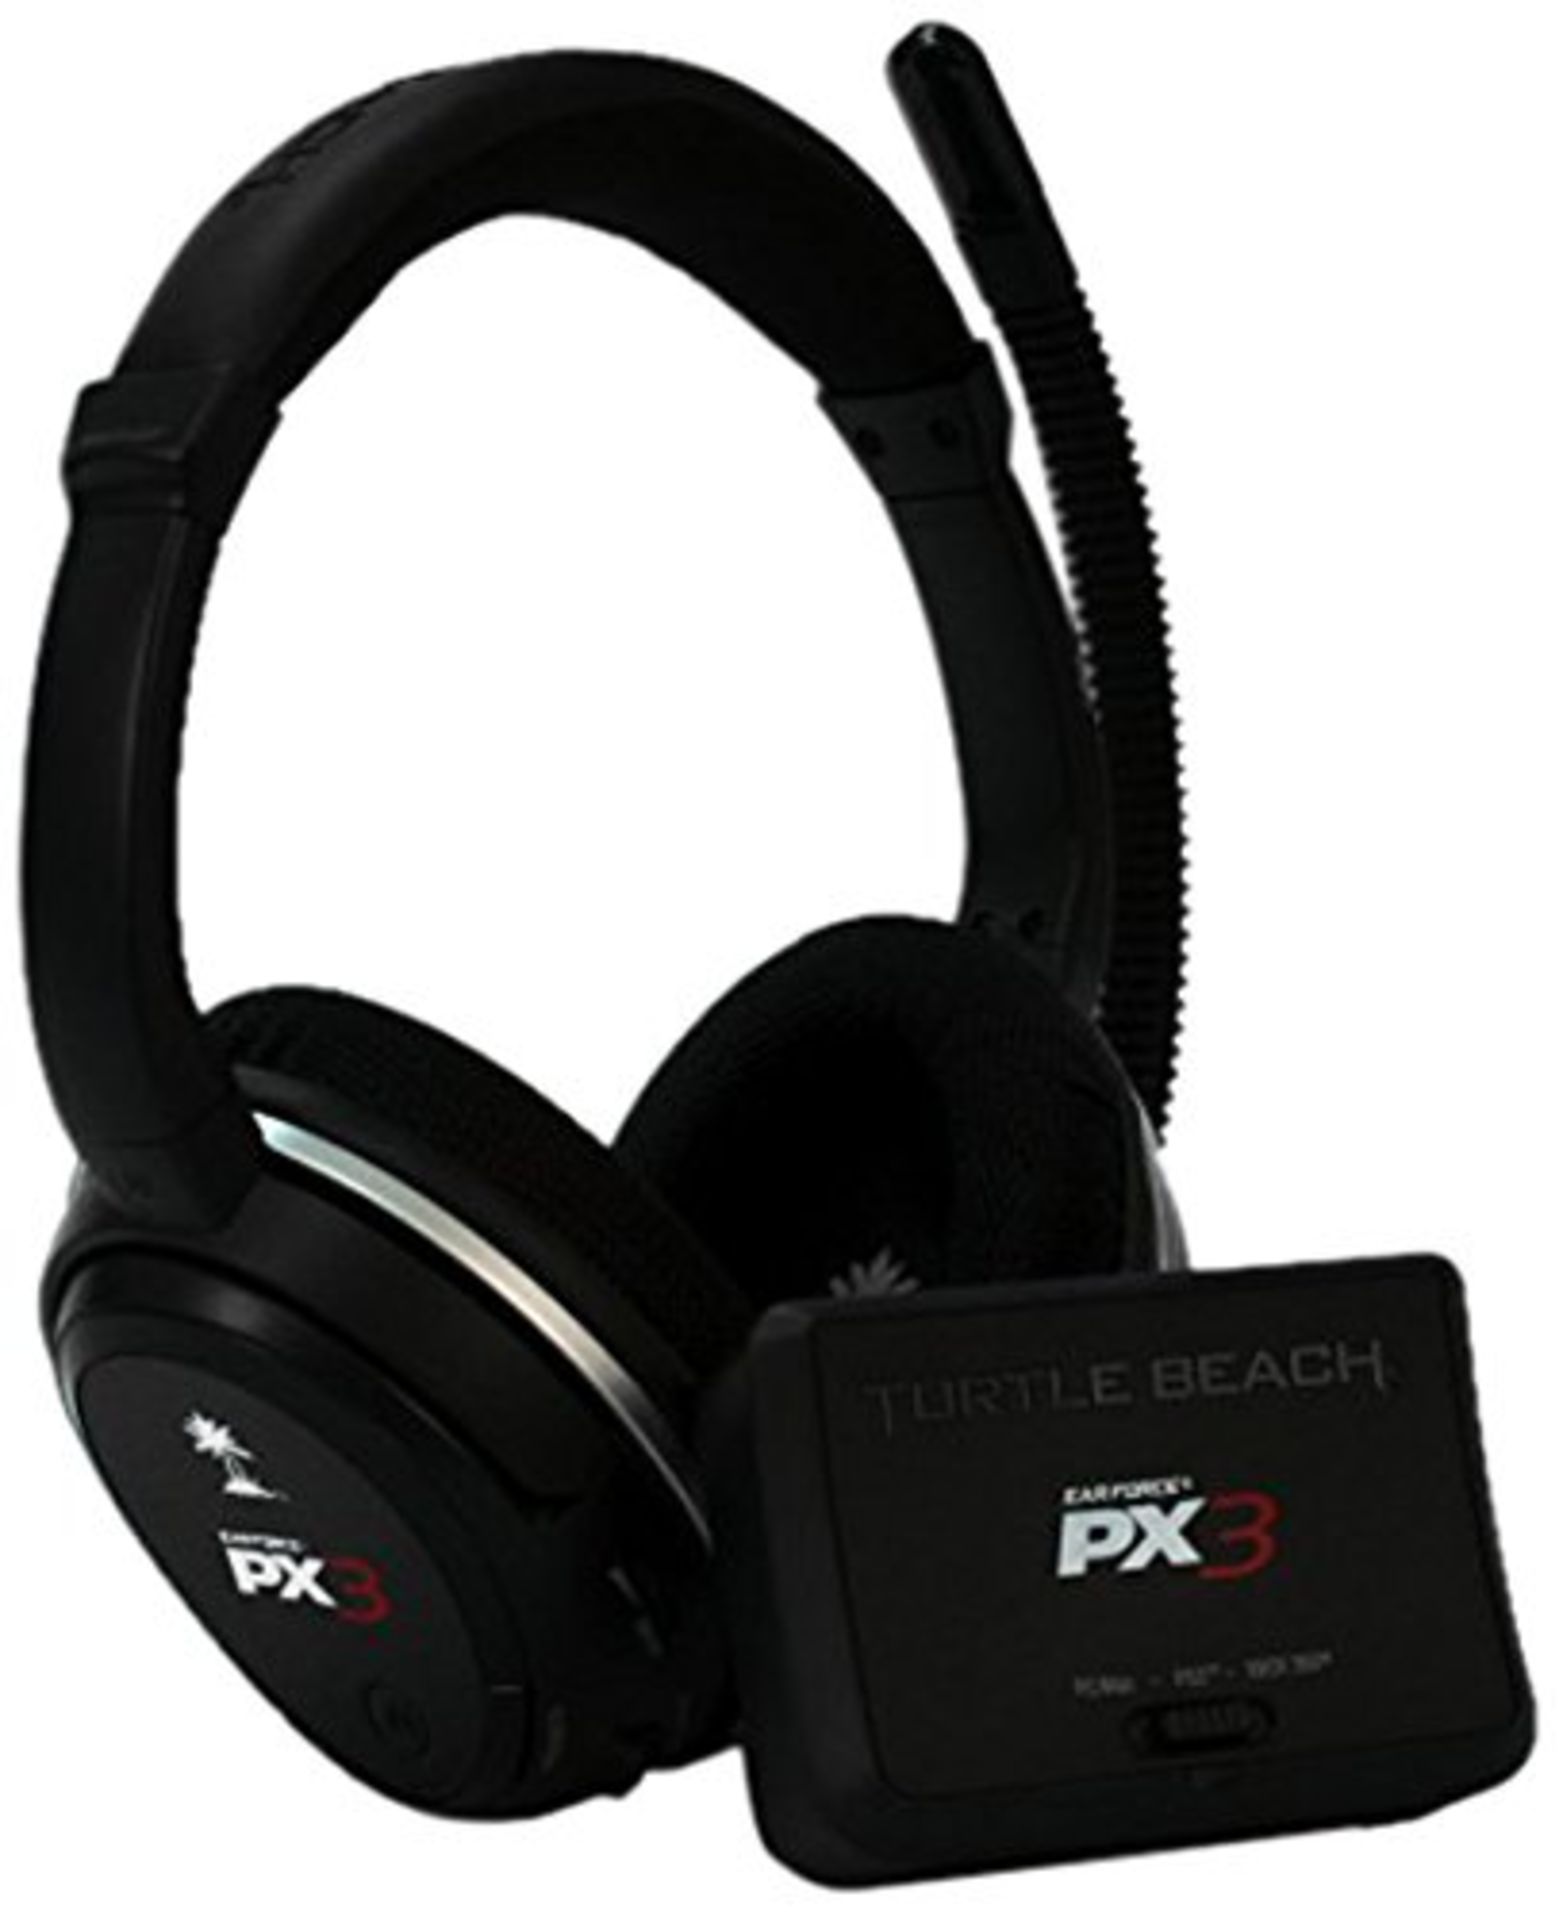 V Grade A Turtle Beach PX3 Programmable Wireless Gaming Headset For PS3 Xbox 360 and PC